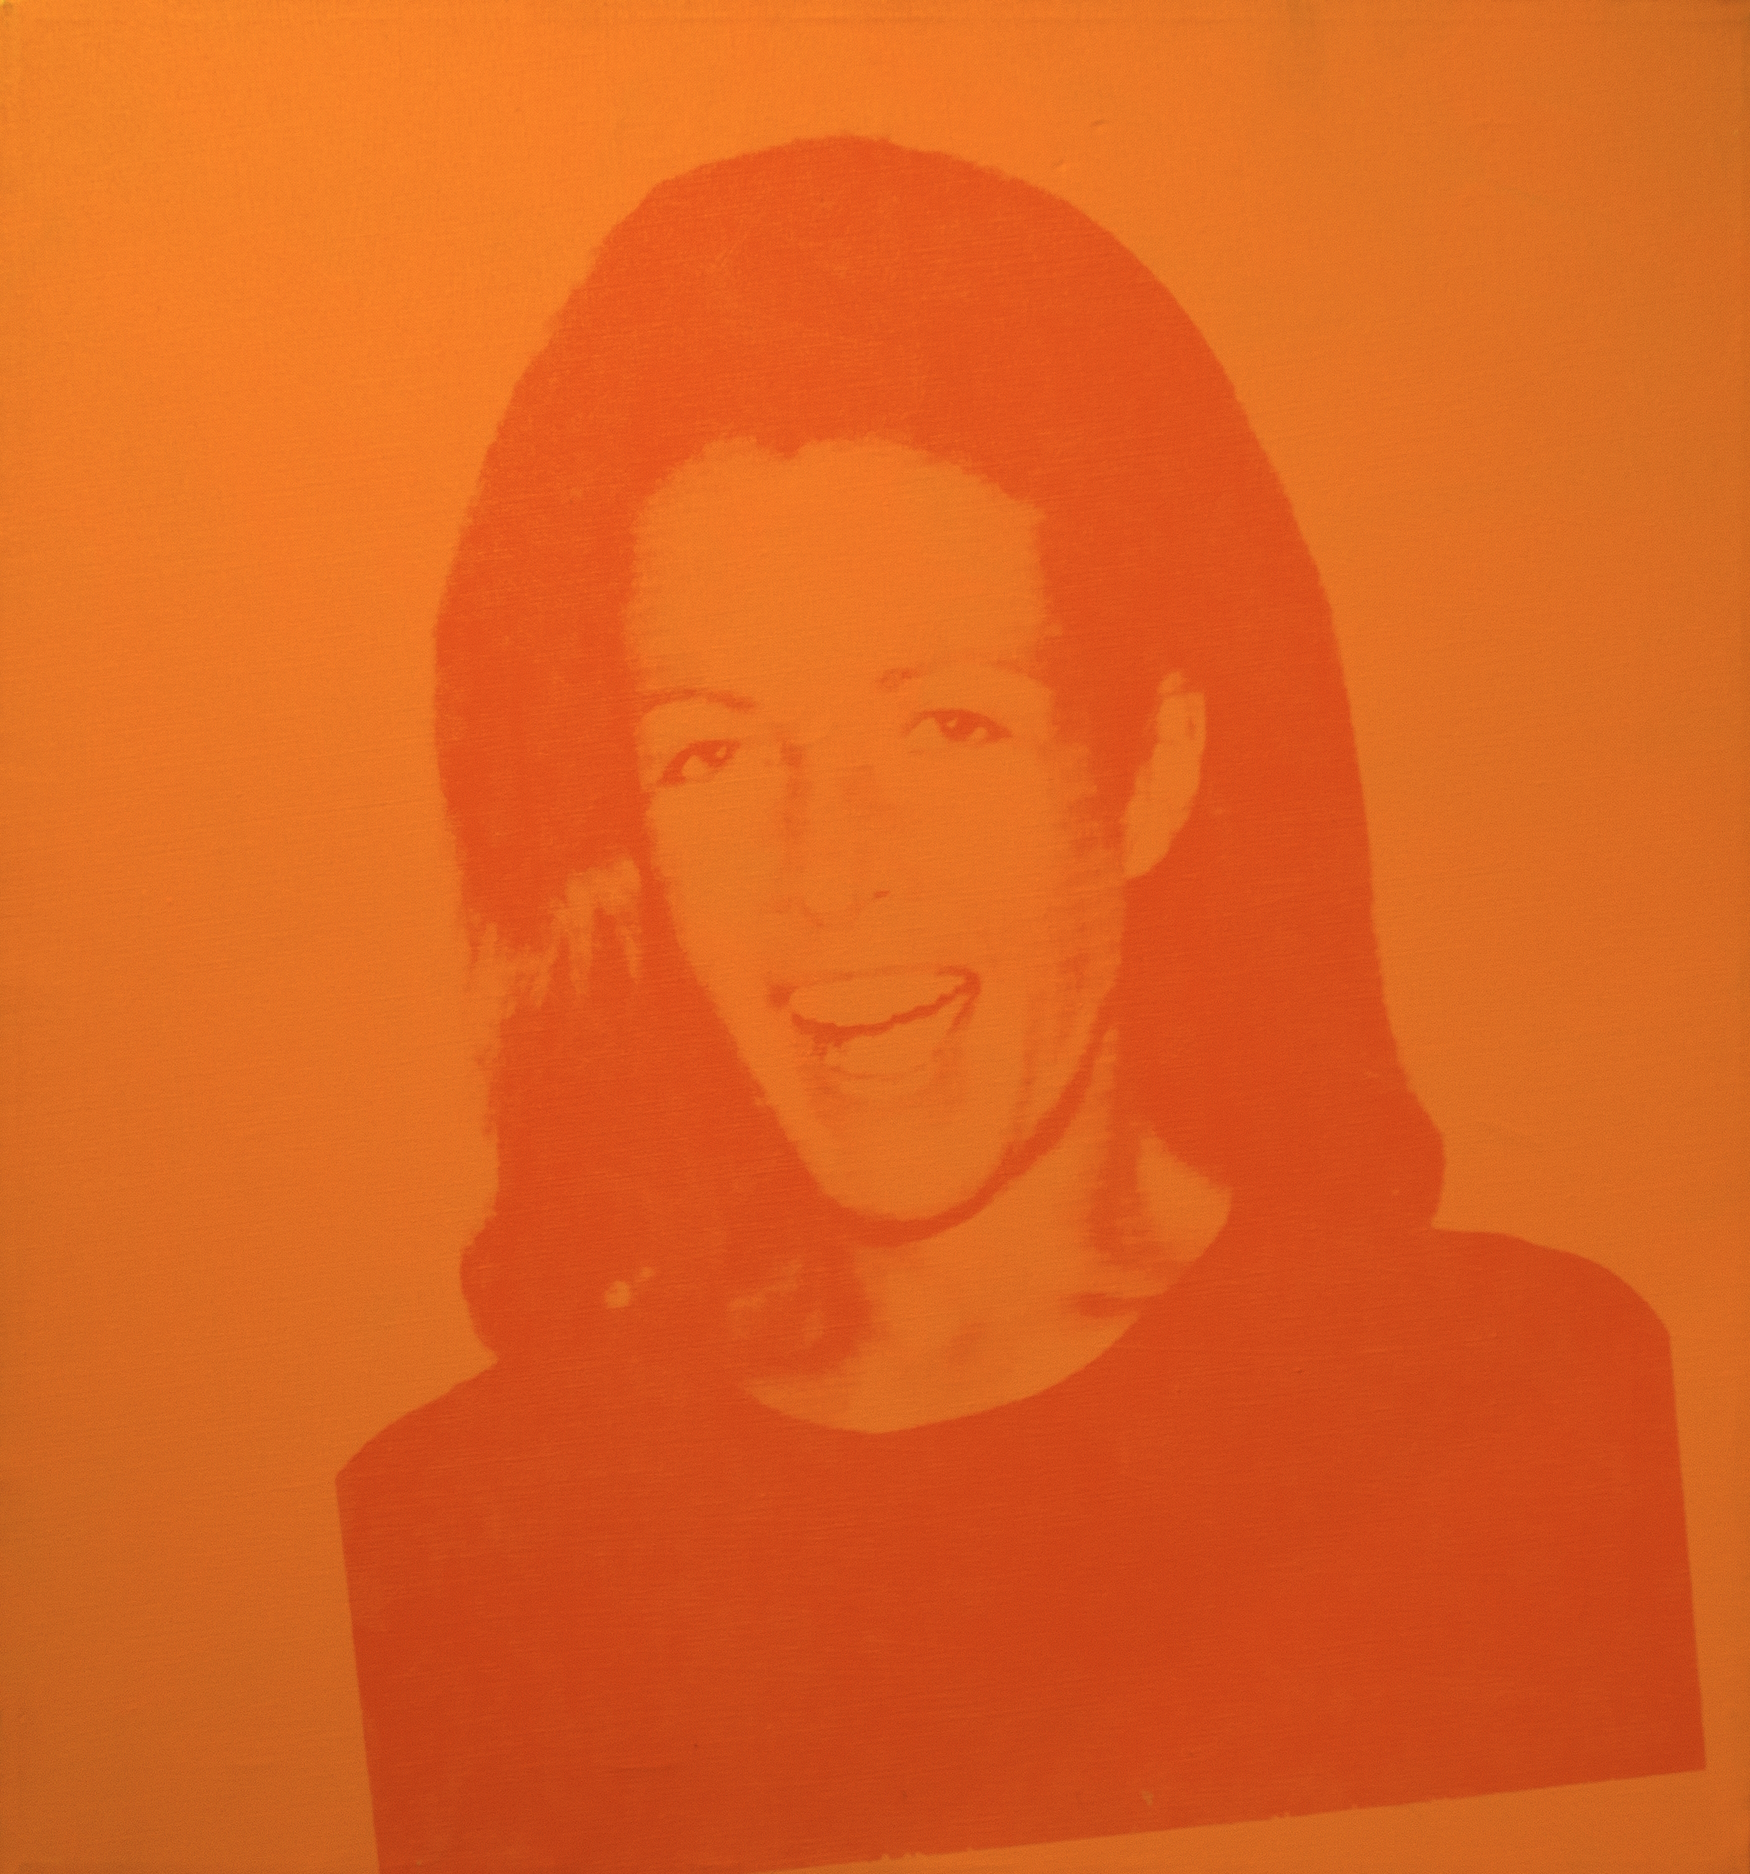 Andy Warhol, Karen Lerner, 1972. Acrylic and screen print on linen. Museum Purchase and Gift in memory of Shirle Nesbitt Westwater by Angela King Westwater and David Meitus, Hugh Nesbitt Westwater, Cordelia Westwater Robinson, William Marc Westwater, and their families